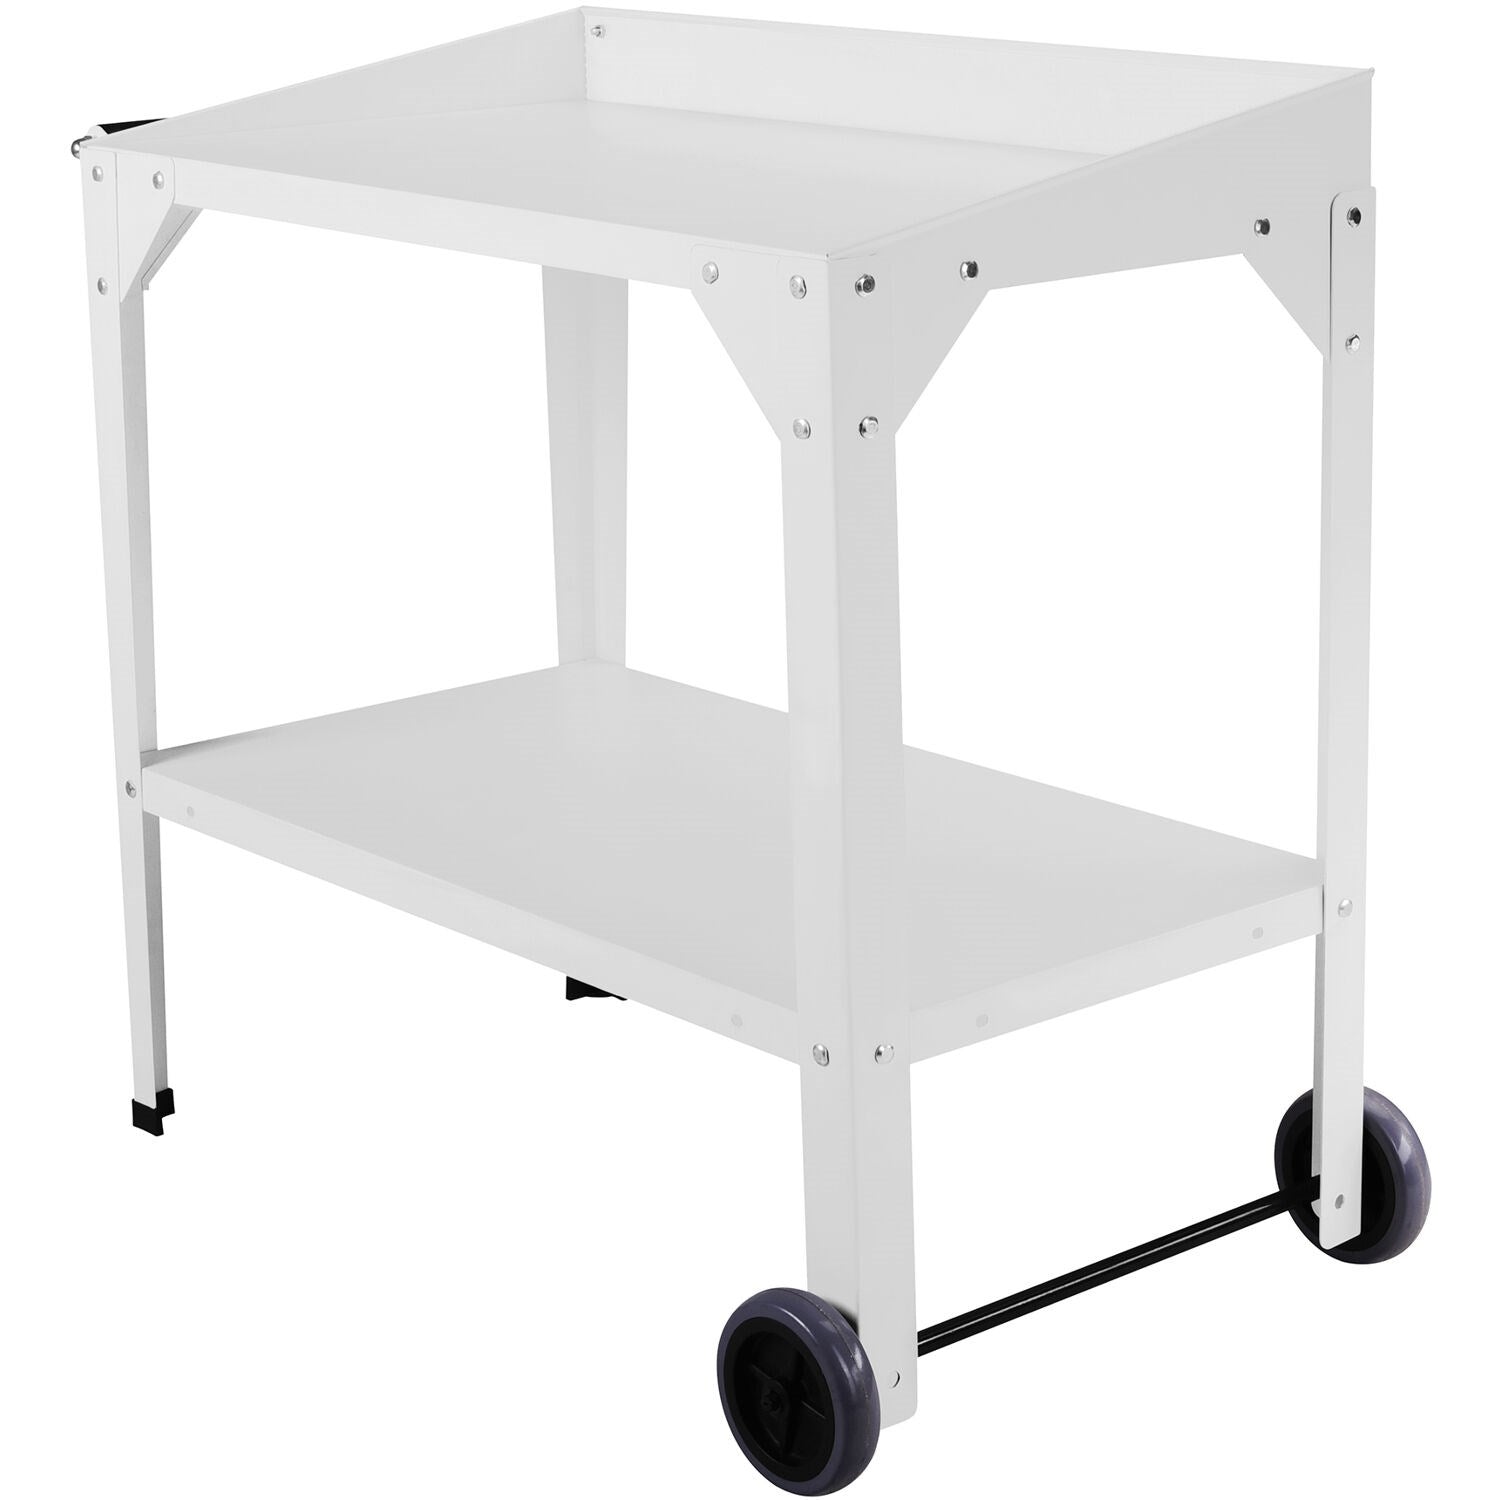 Hanover Galvanized Steel Portable Multi-Use Two-Tier Trolley, Rolling Cart - Outdoor Garden Potting Table Work Bench, White